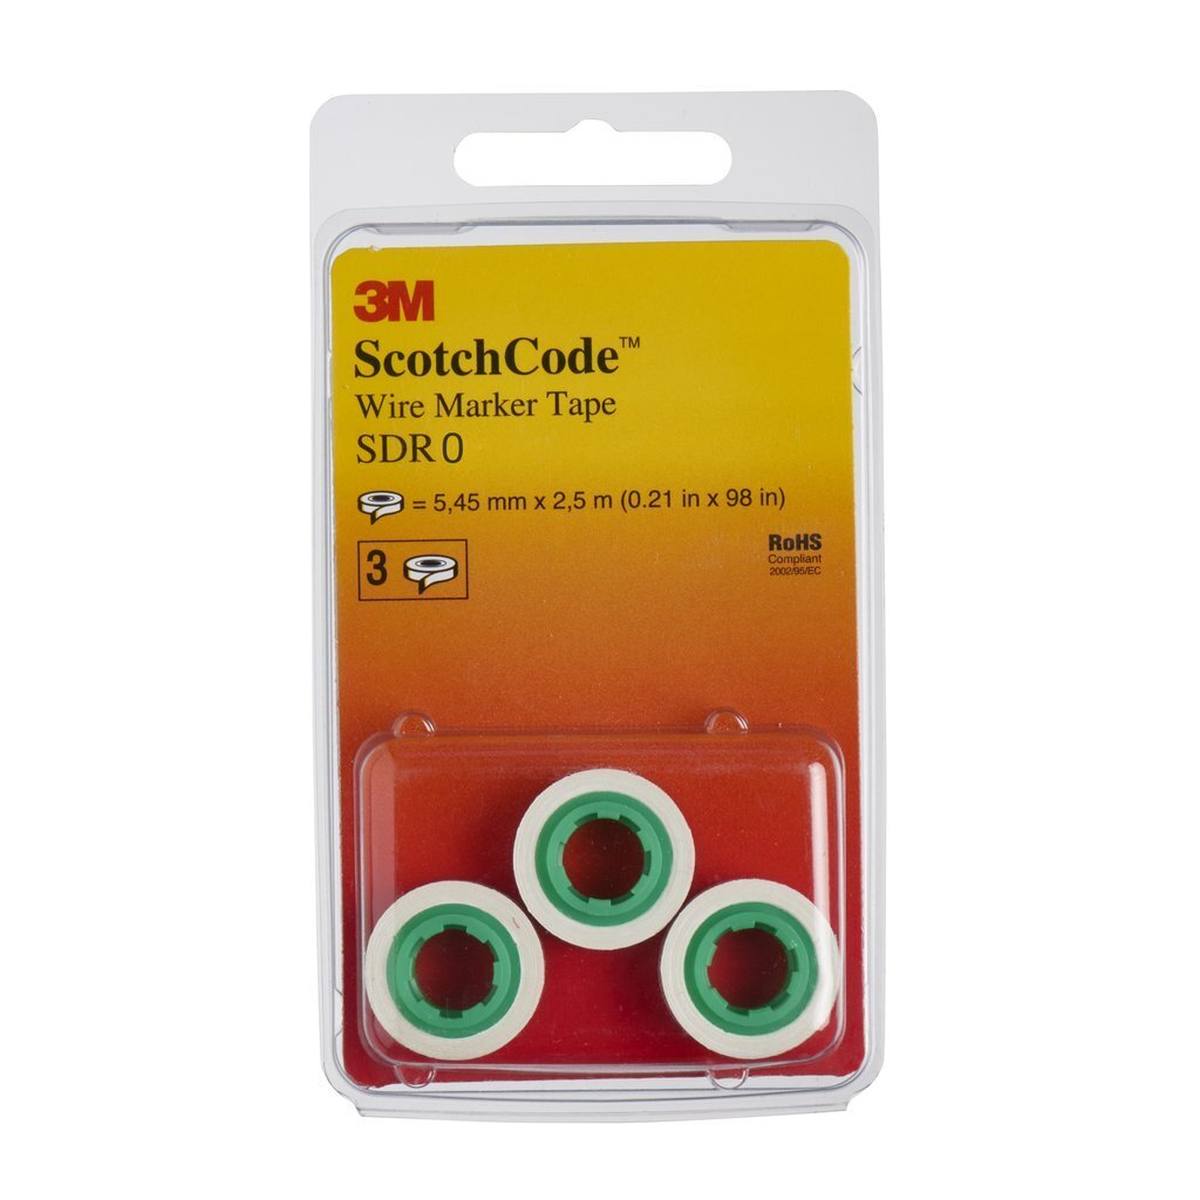 3M ScotchCode SDR-0 cable marker refill rolls, number 0, pack of 3